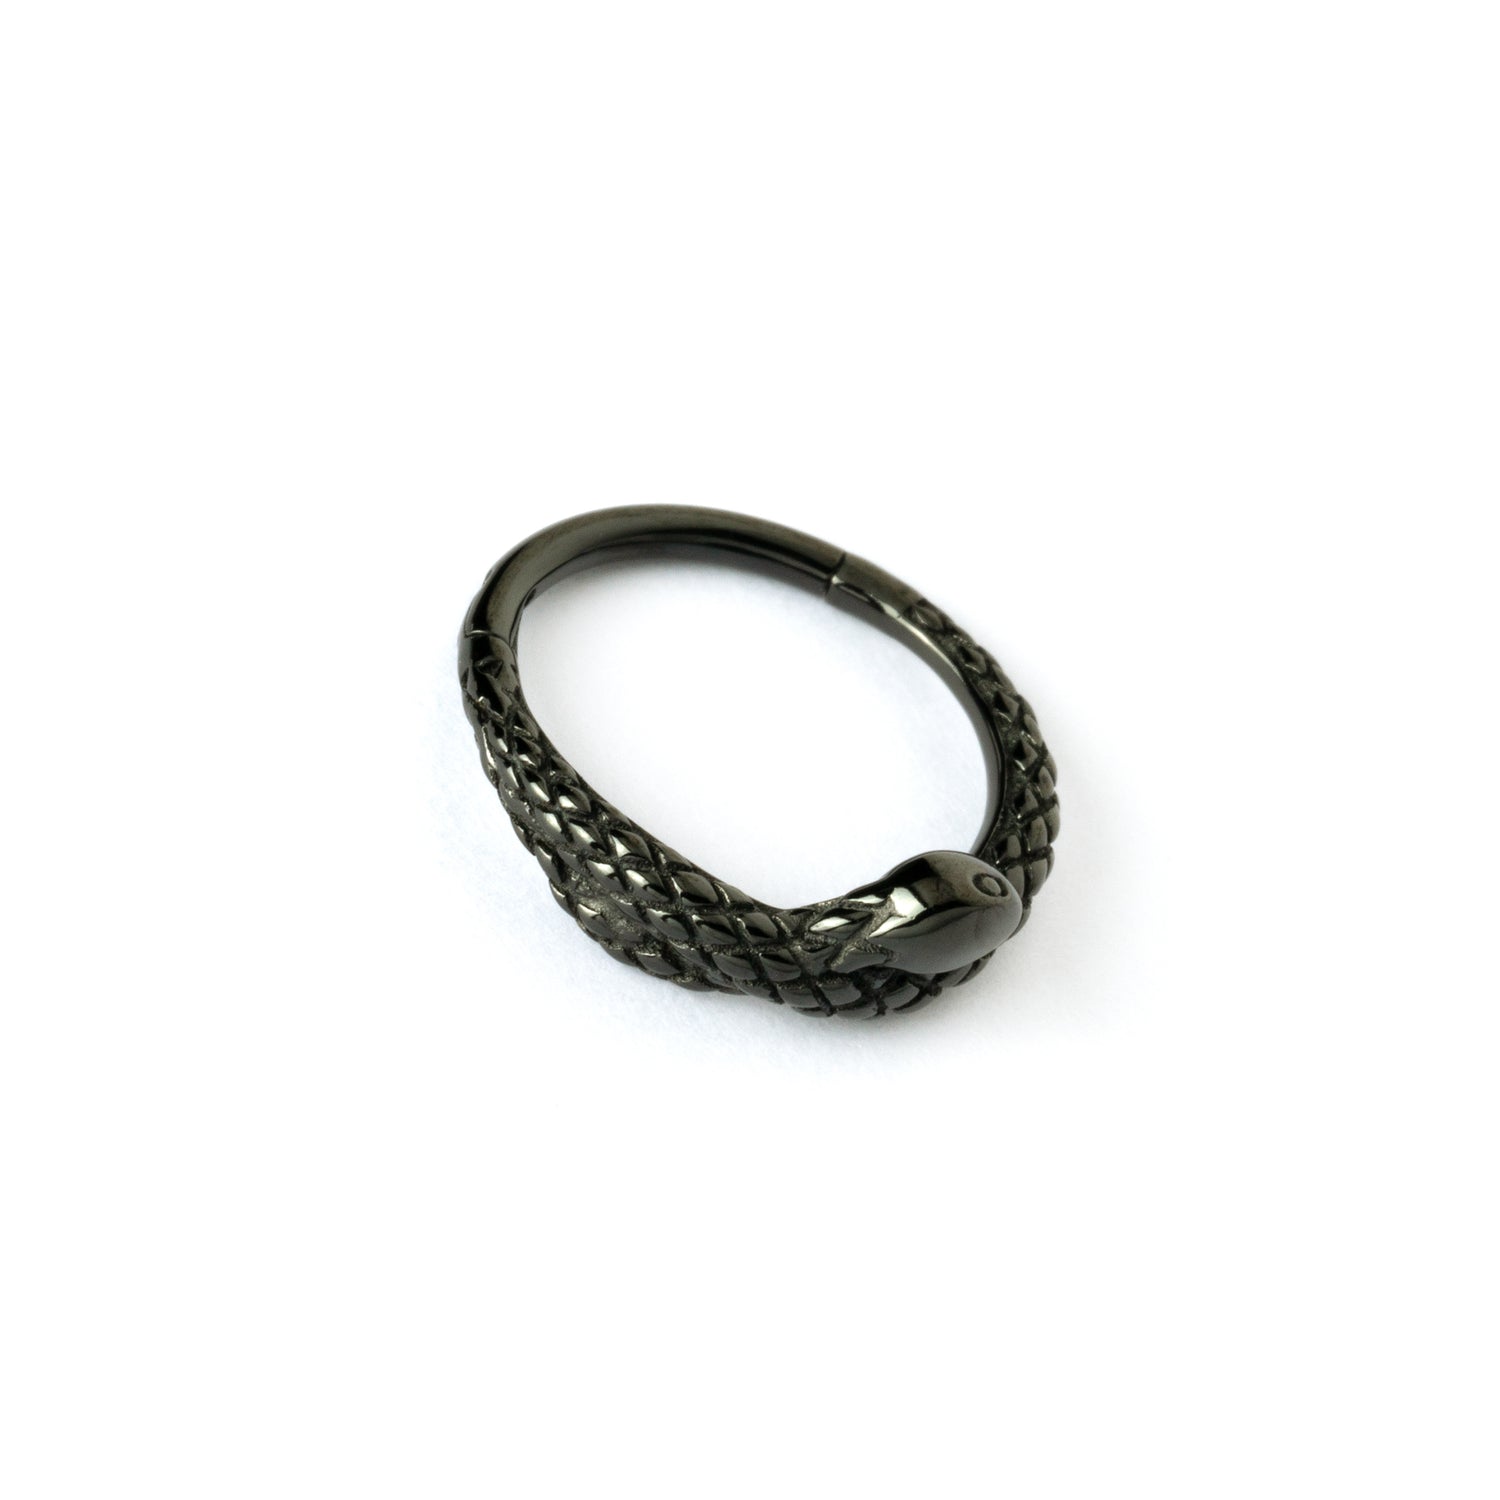 shiny black surgical steel snake piercing clicker ring right side view